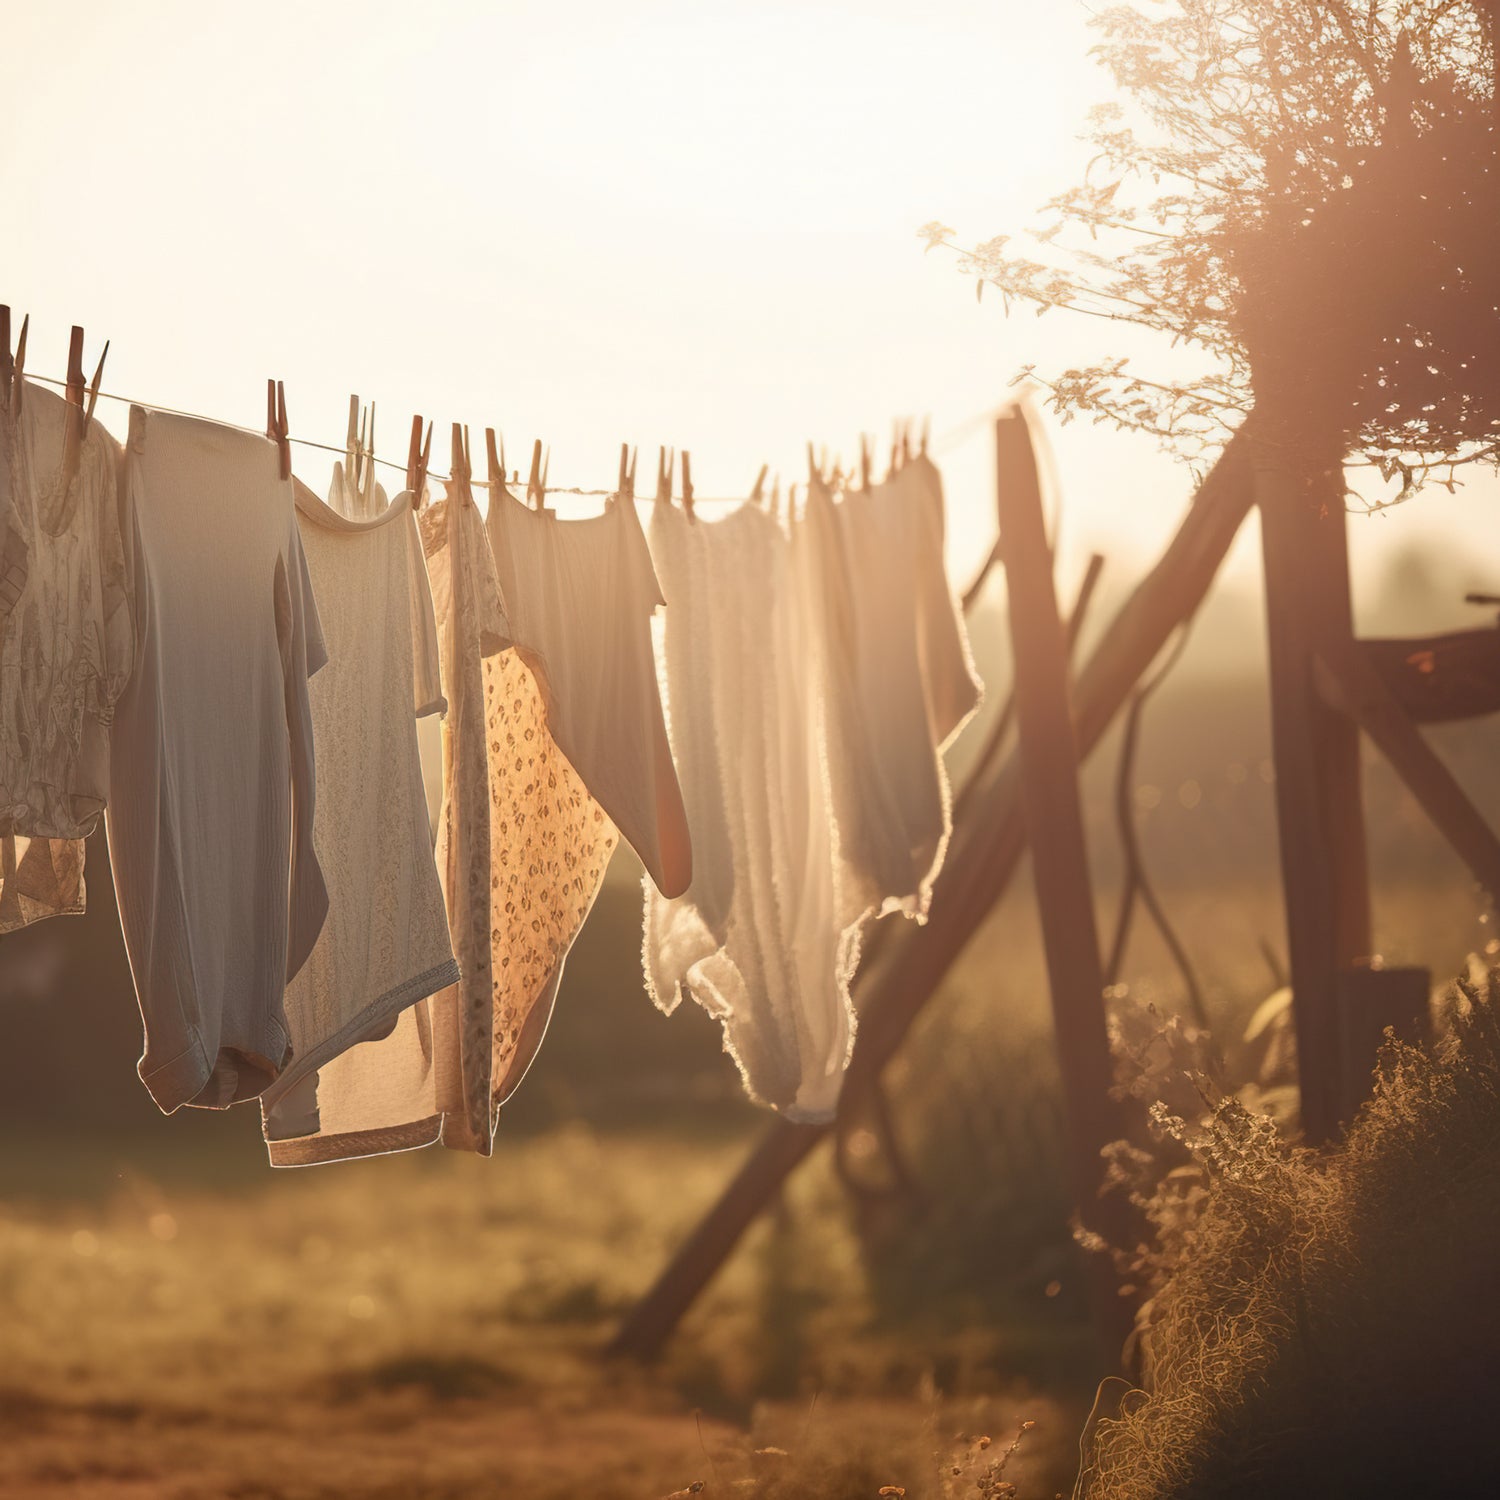 Clothes hang on a laundry line on a bright summer day. Scenes such as this are part of the inspiration for our "Weathered wood" scented candle